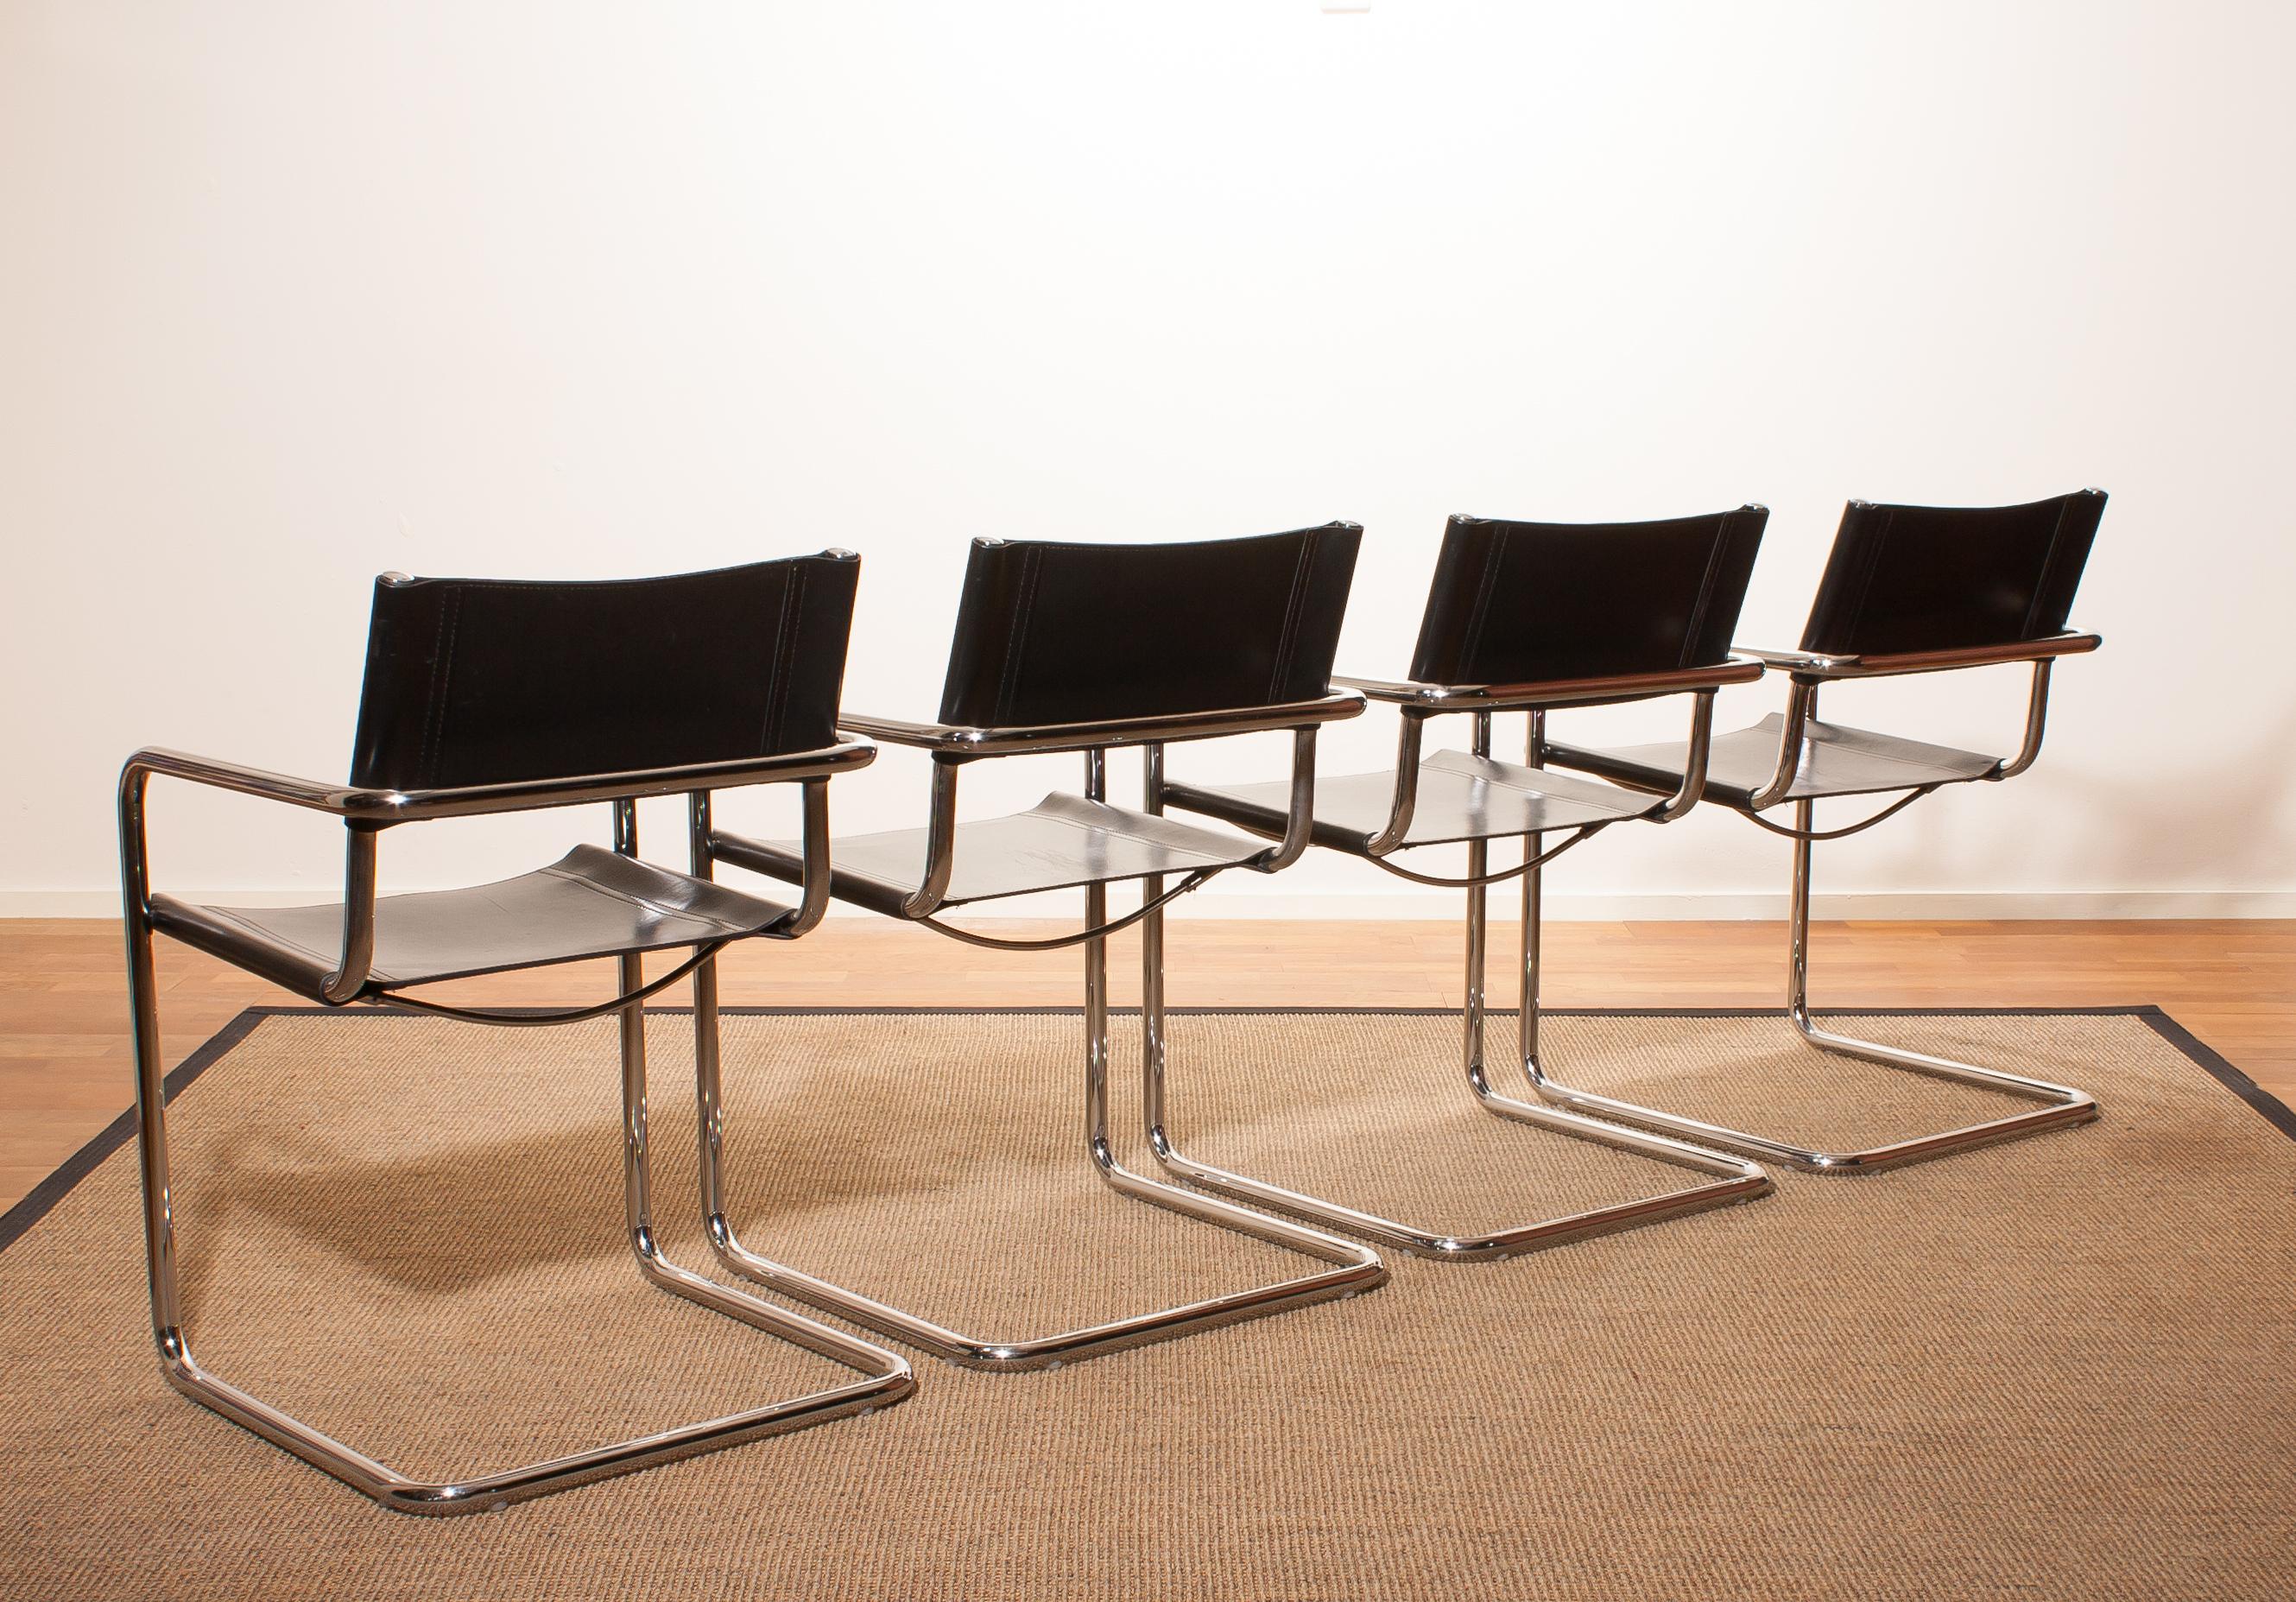 Late 20th Century 1970s, 4 Tubular Steel and Sturdy Black Leather Dining Chairs by Matteo Grassi